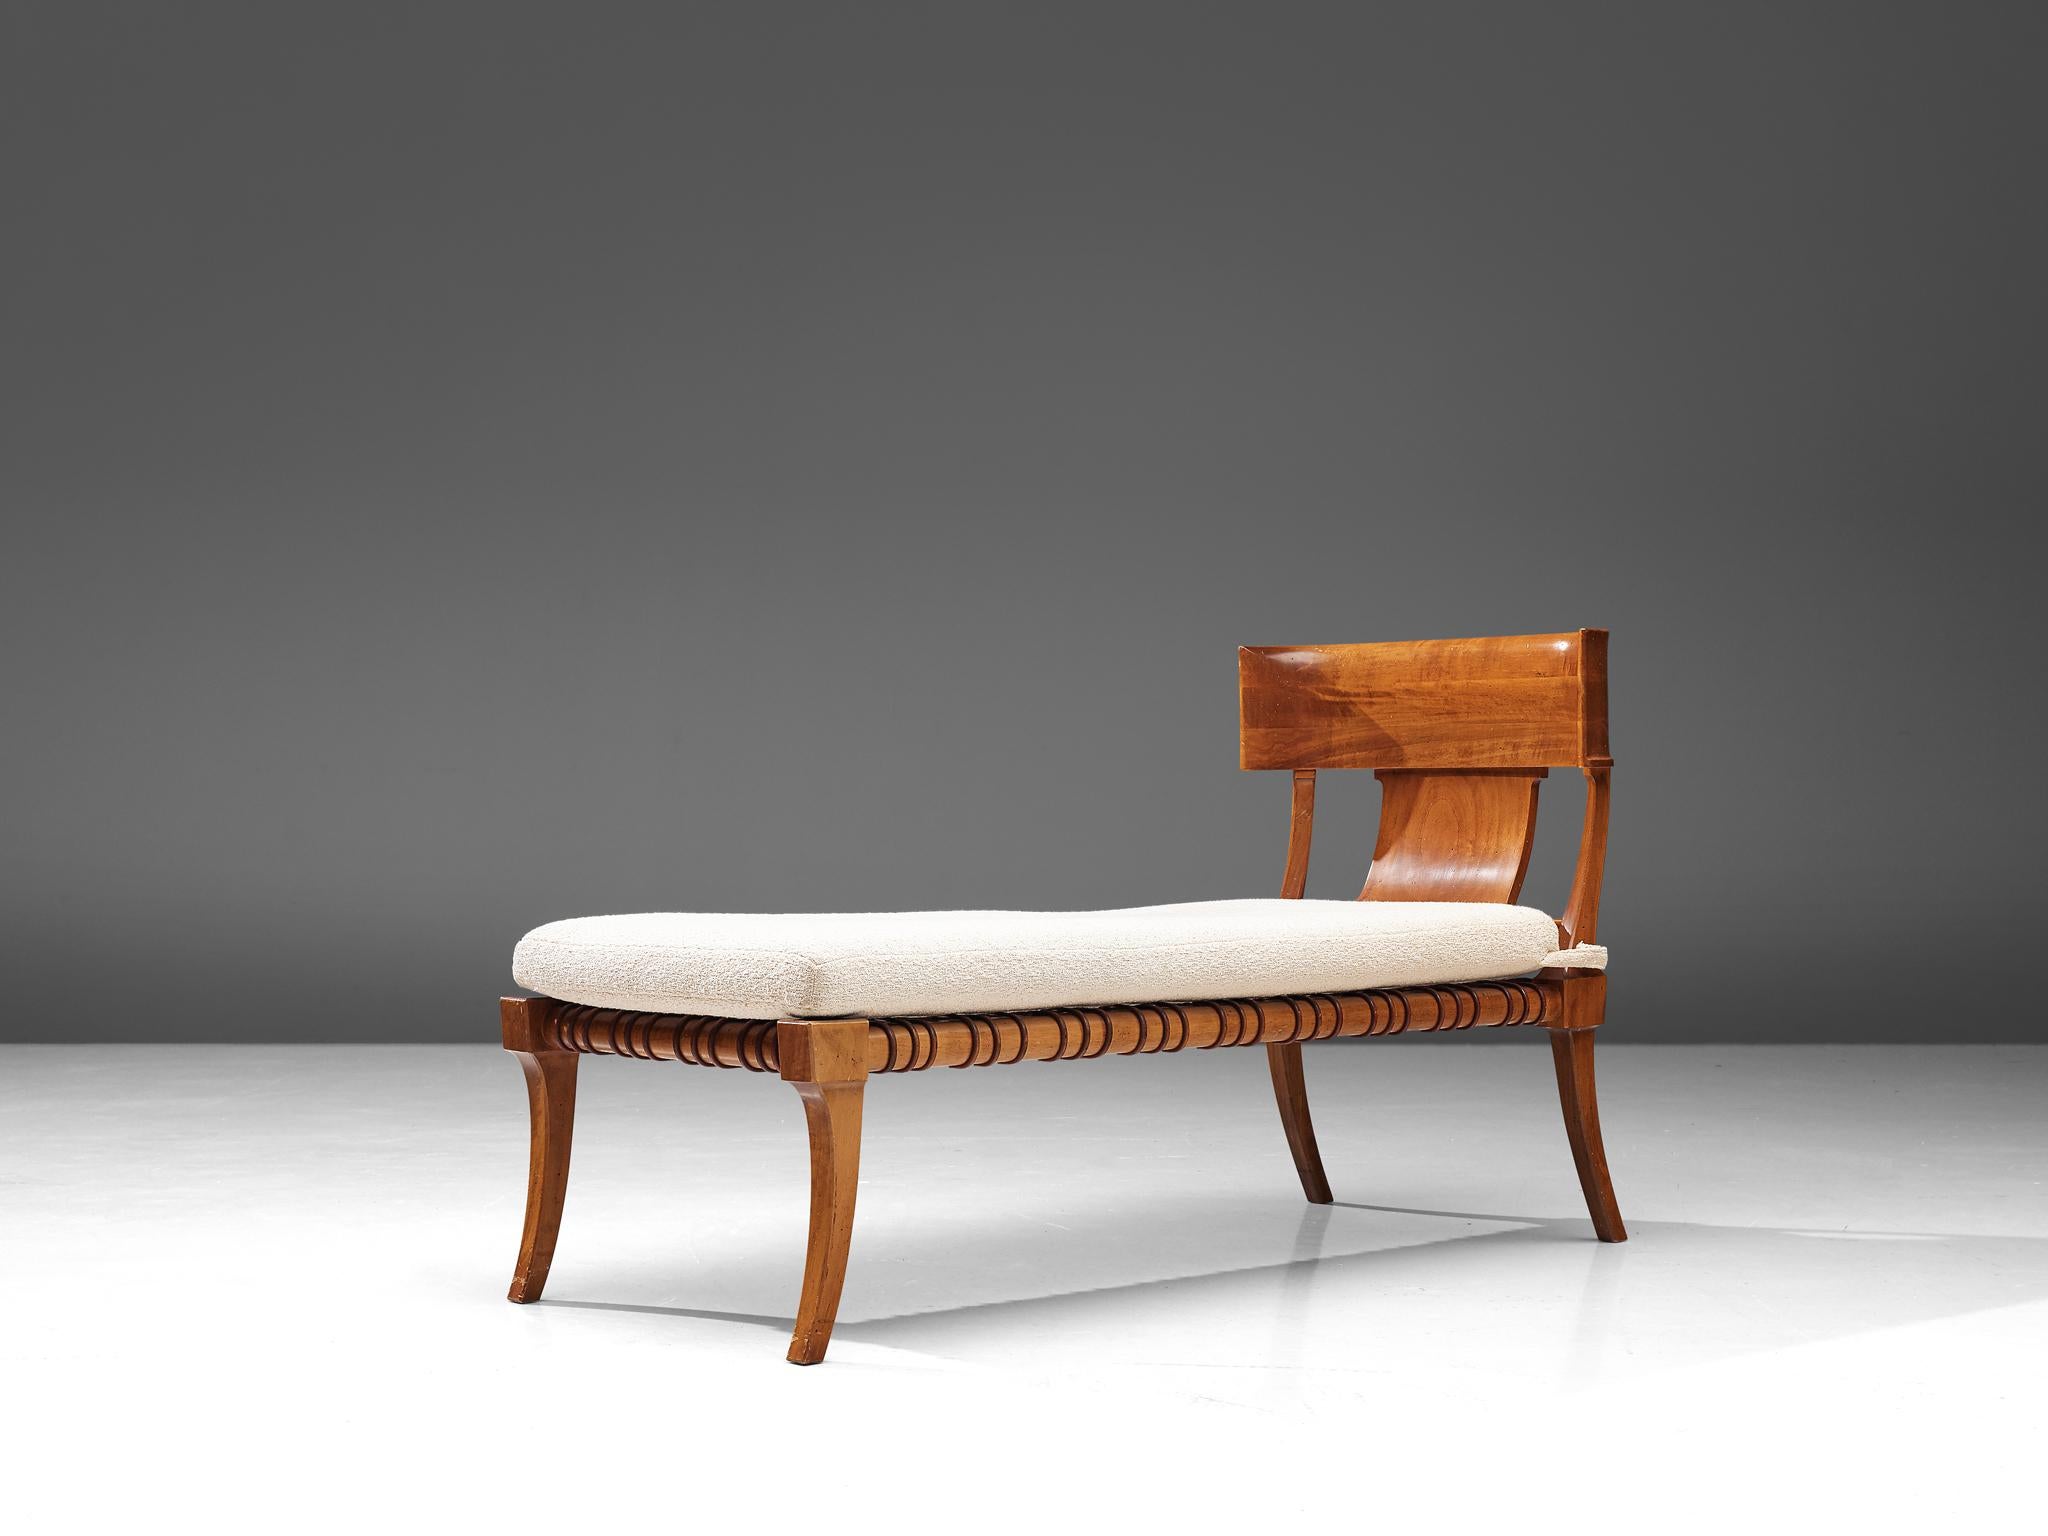 T.H. Robjohn-Gibbings for Saridis of Athens, 'Klini' chaise lounge model nr. 11, walnut, leather, fabric, United States, 1961.

An ancient Greek inspired daybed by the British designer T.H. Robjohn Gibbings. This lounge was part of the collection